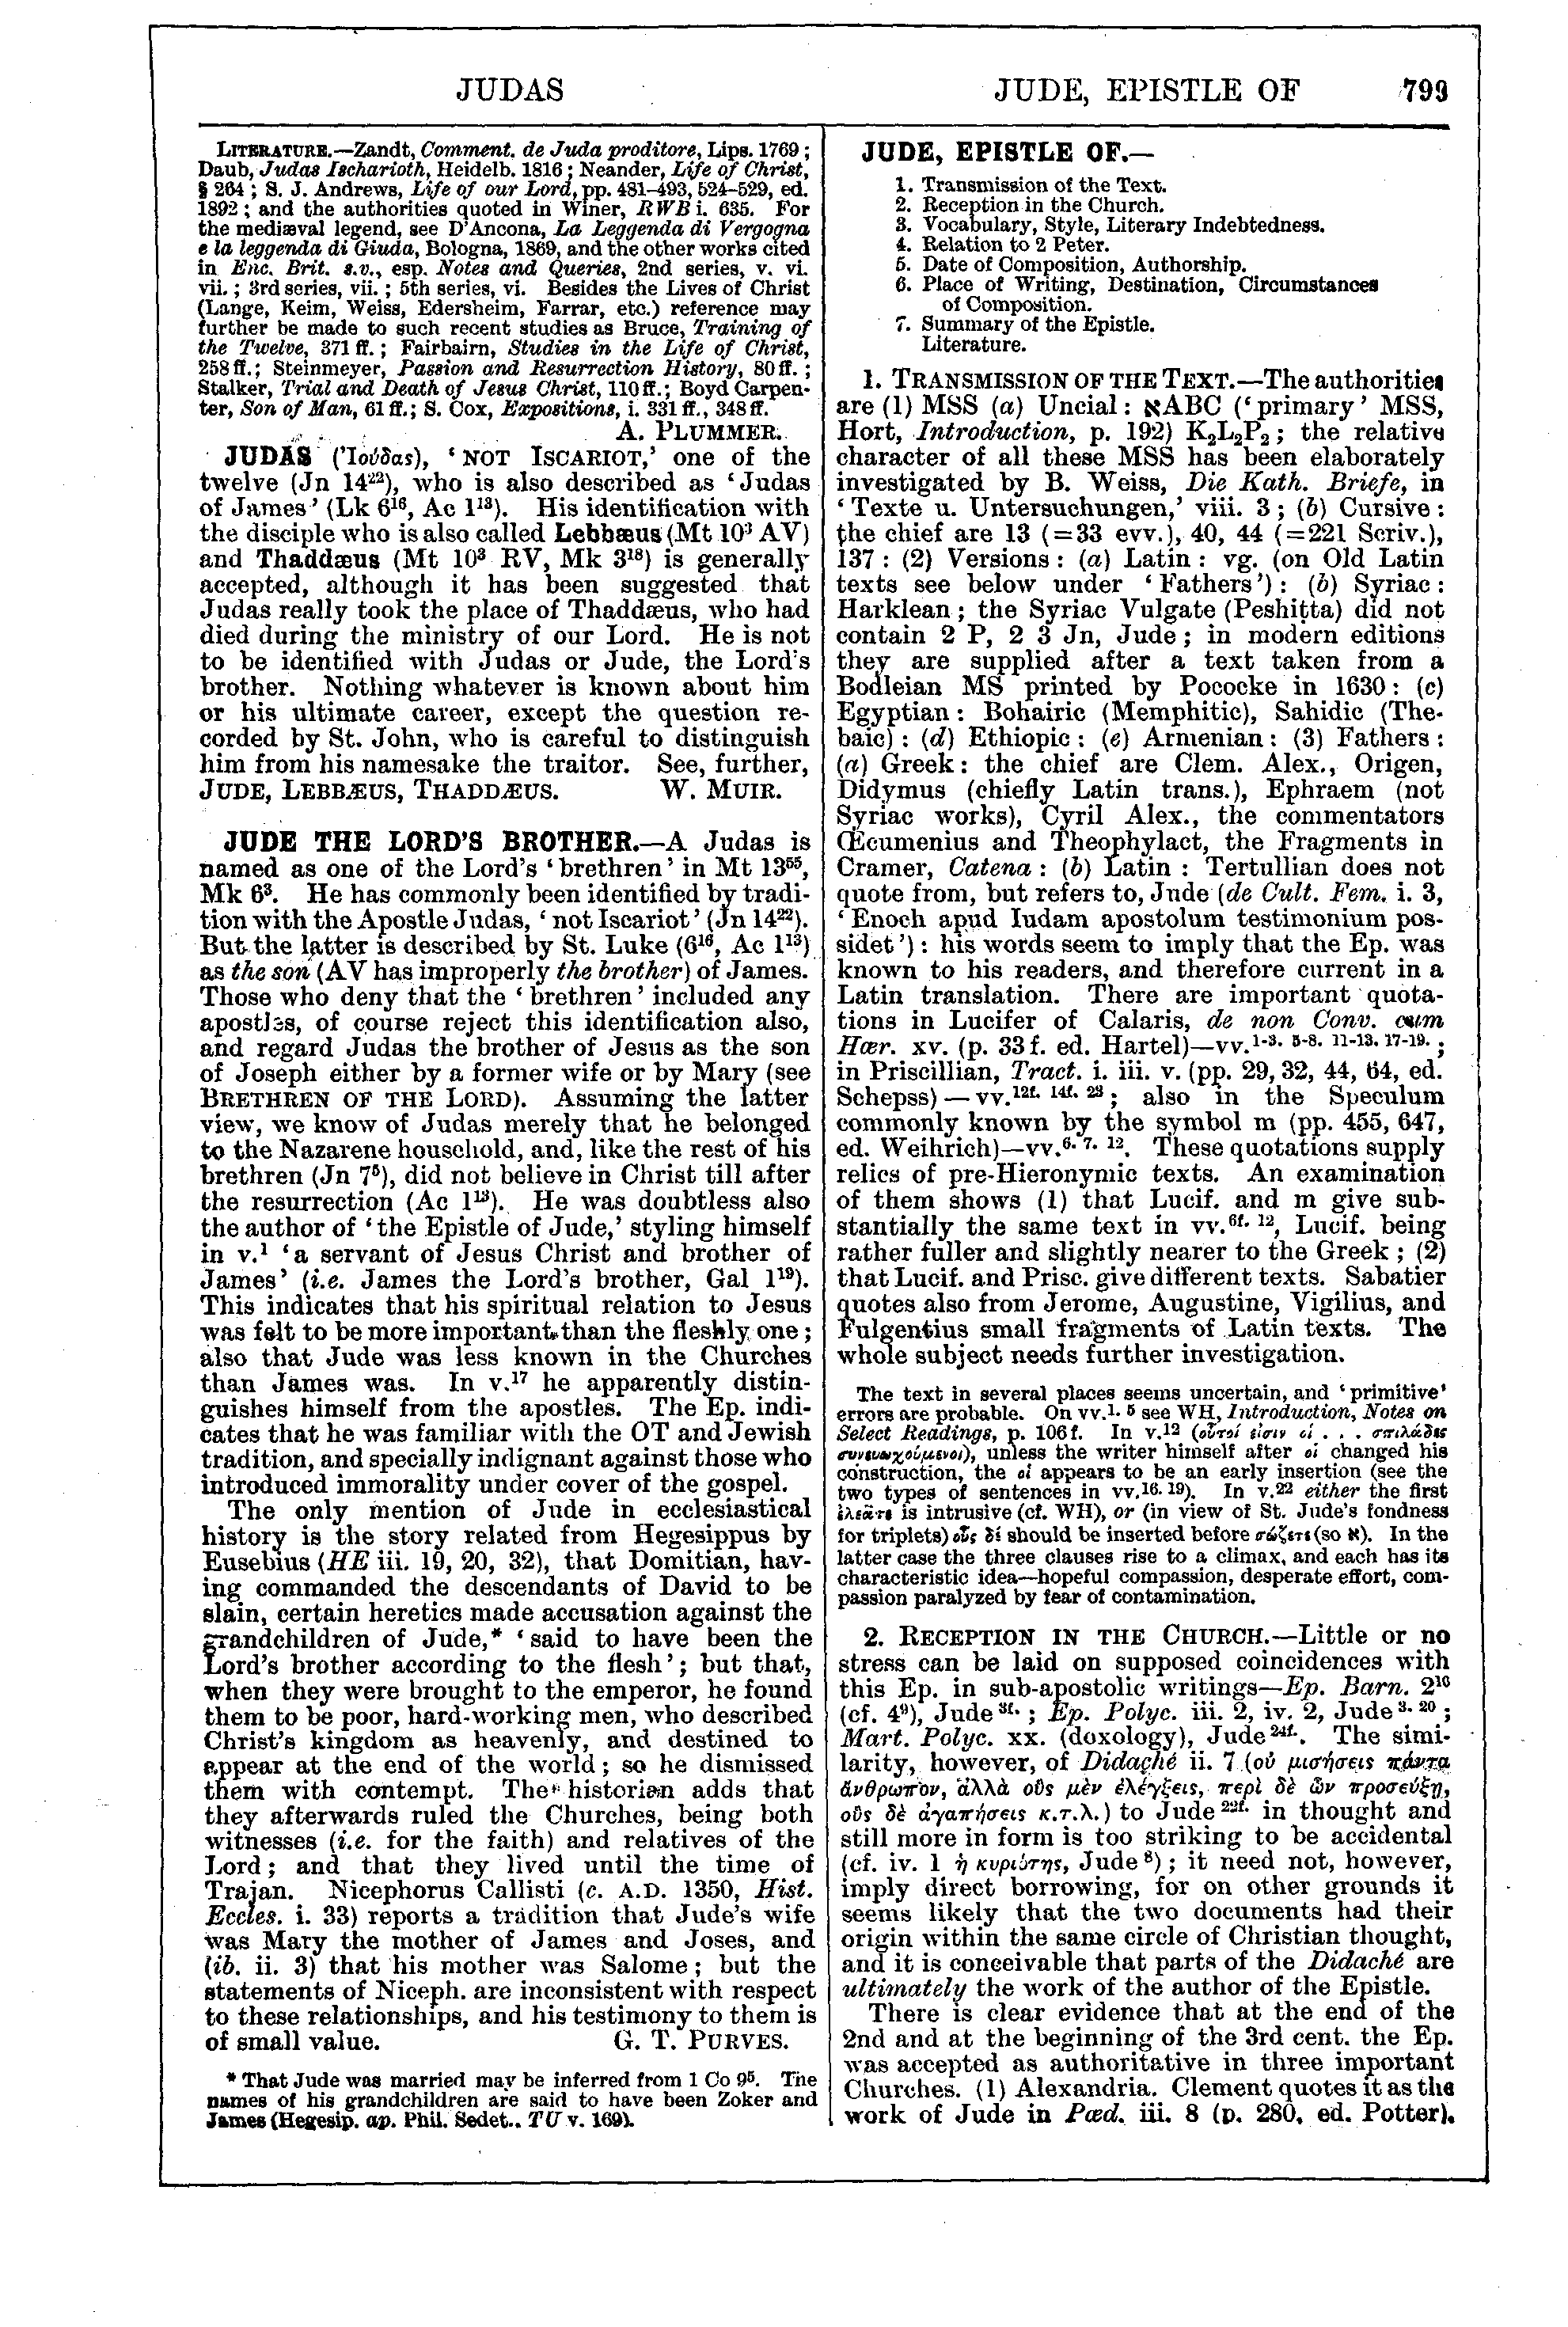 Image of page 799